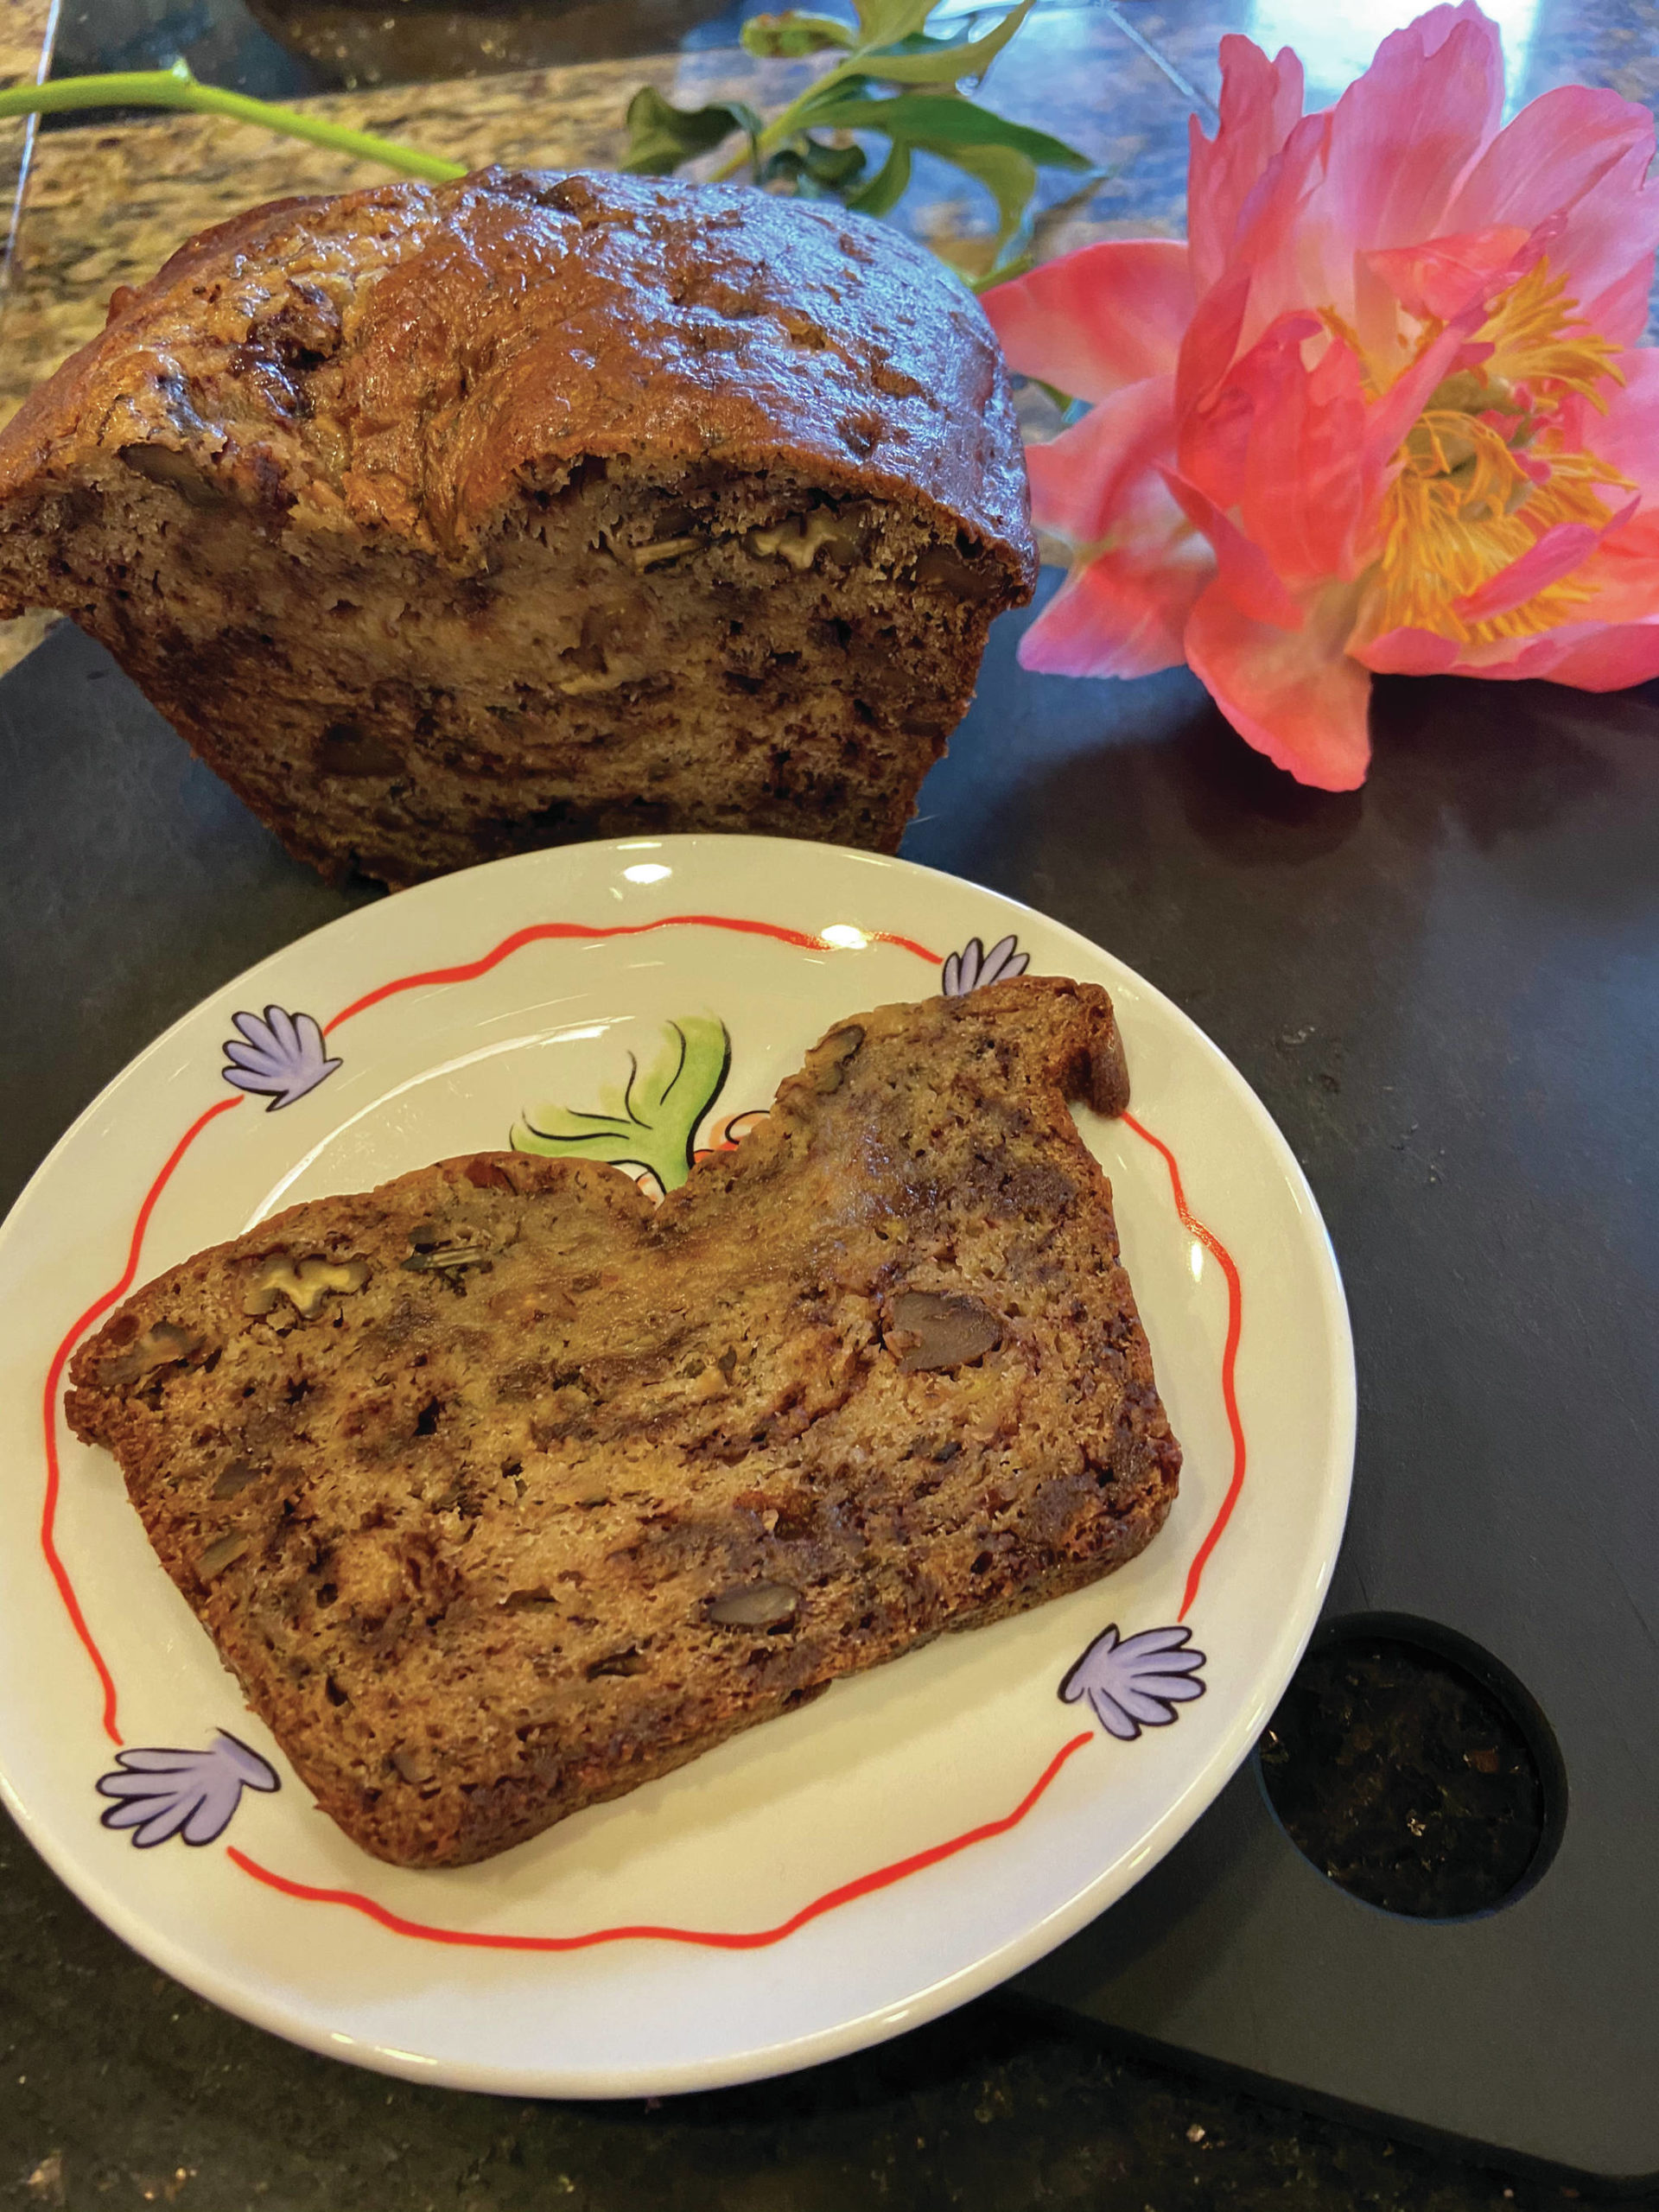 Chocolate and banana bread is just the treat for summer, as seen here on Monday, July 13, 2020, in Teri Robl’s Homer, Alaska, kitchen. (Photo by Teri Robl)